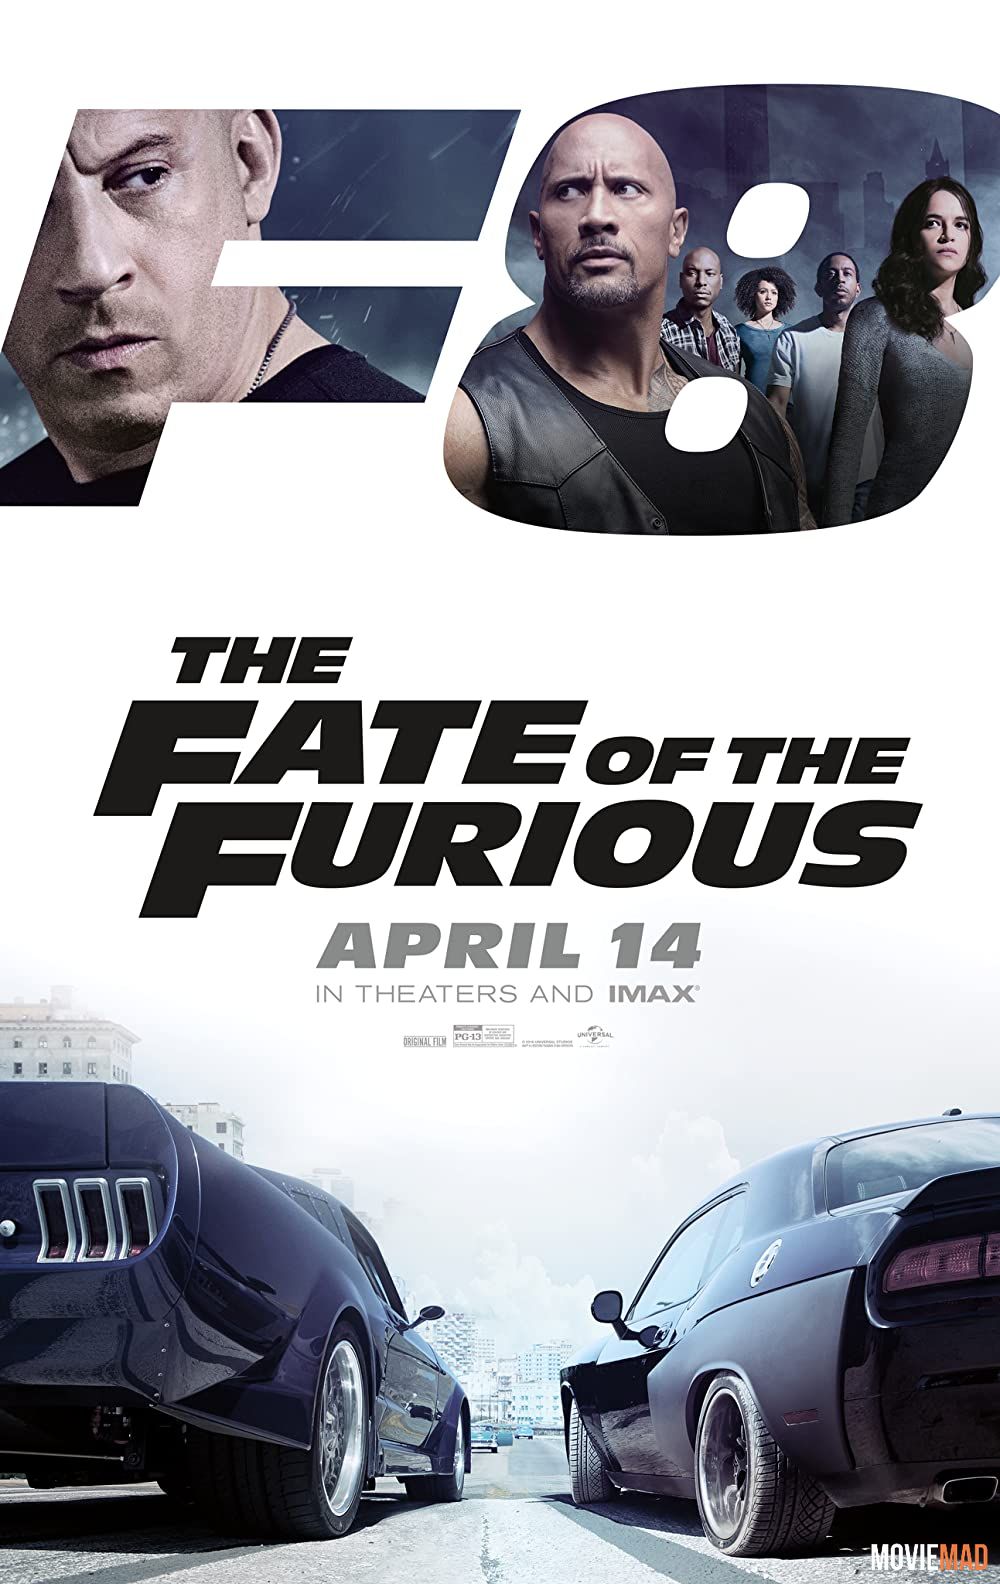 The Fate of the Furious (2017) Hindi Dubbed ORG BluRay Full Movie 720p 480p Movie download